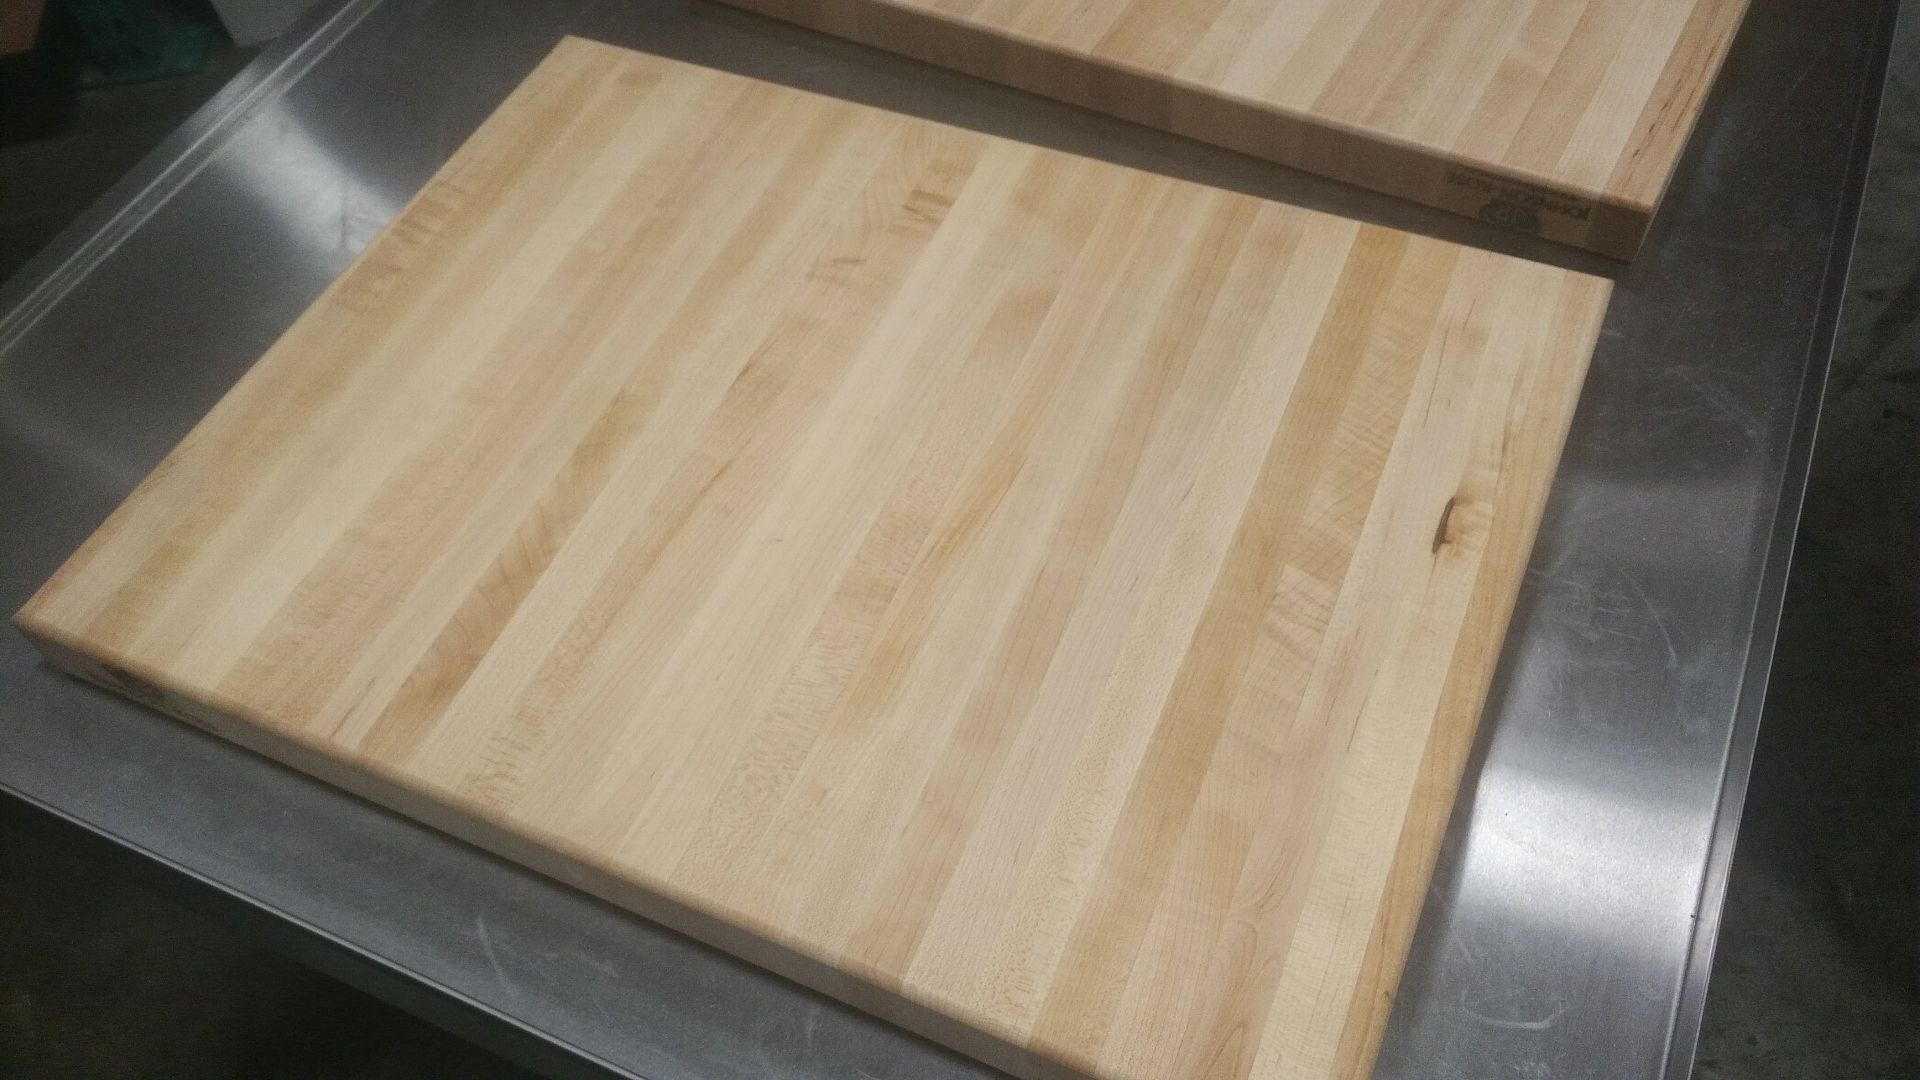 20" x 15" x 1.5" Hard Canadian Maple Solid Carving Board